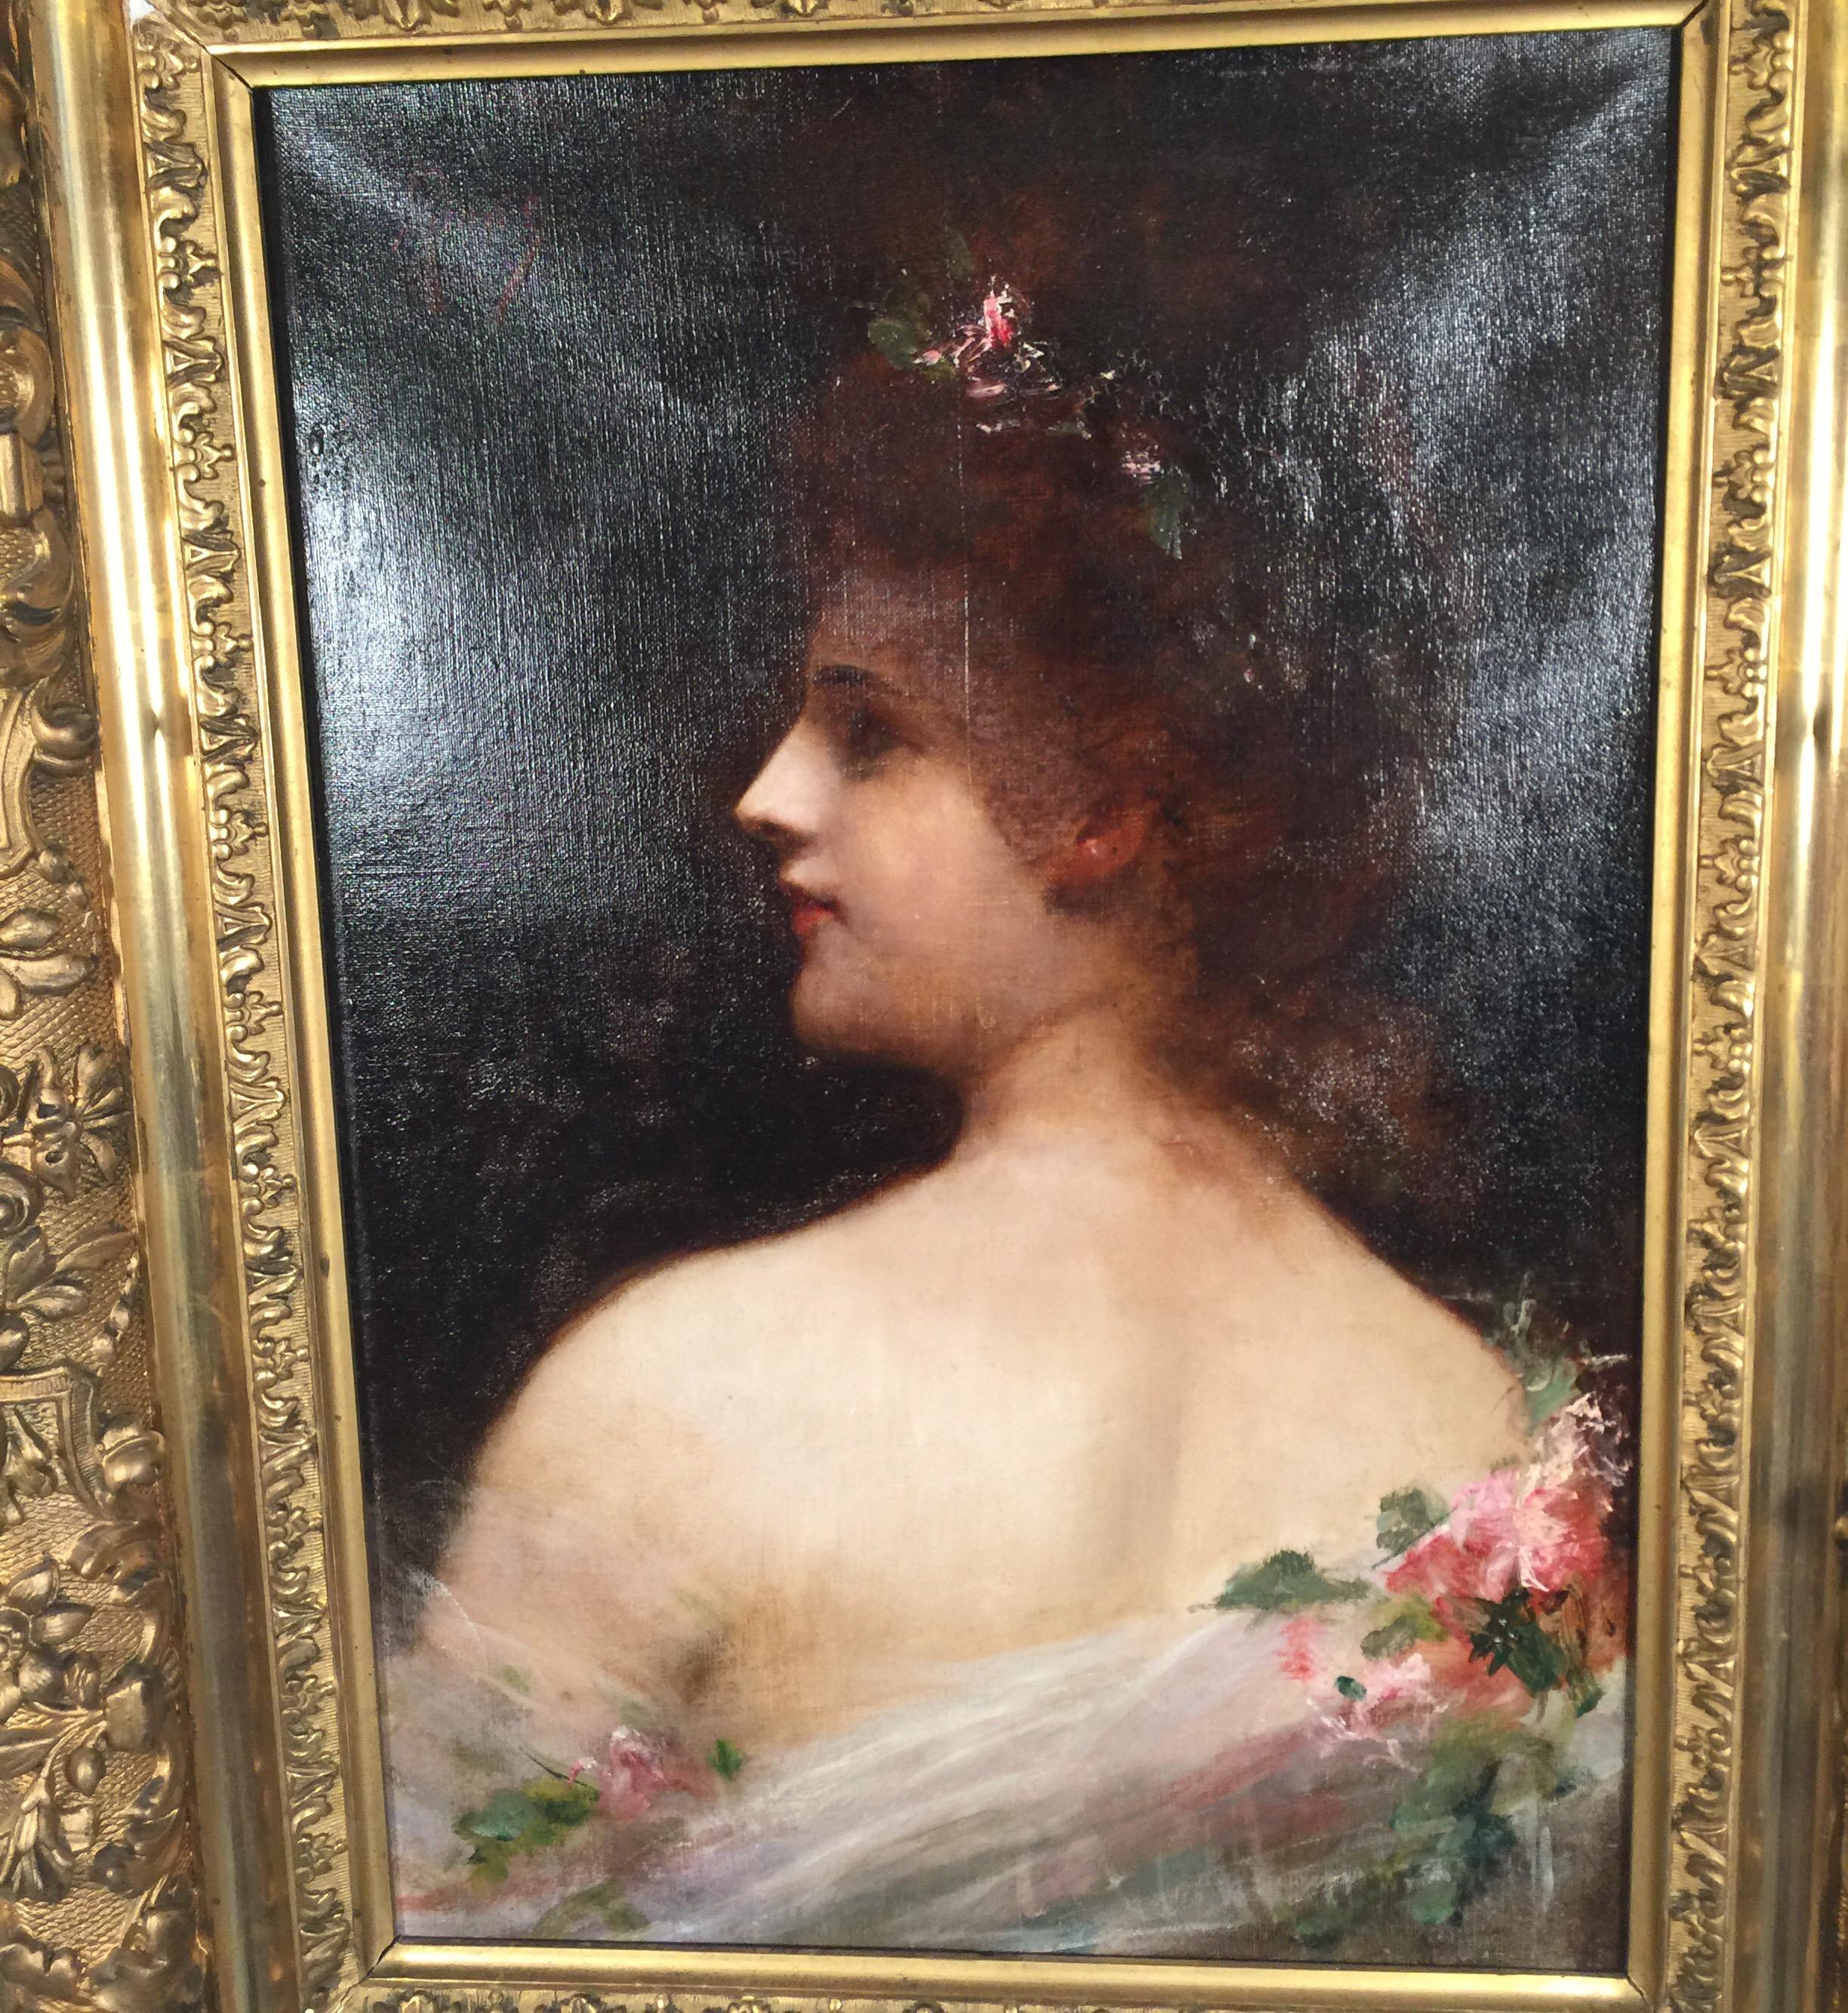 Oil on canvas portrait of a Spanish aristocratic lady. The painting of a young woman in profile with a dark background dressed in a formal gown with pink roses, signed by the artist Riani in the upper left corner. The original giltwood frame with